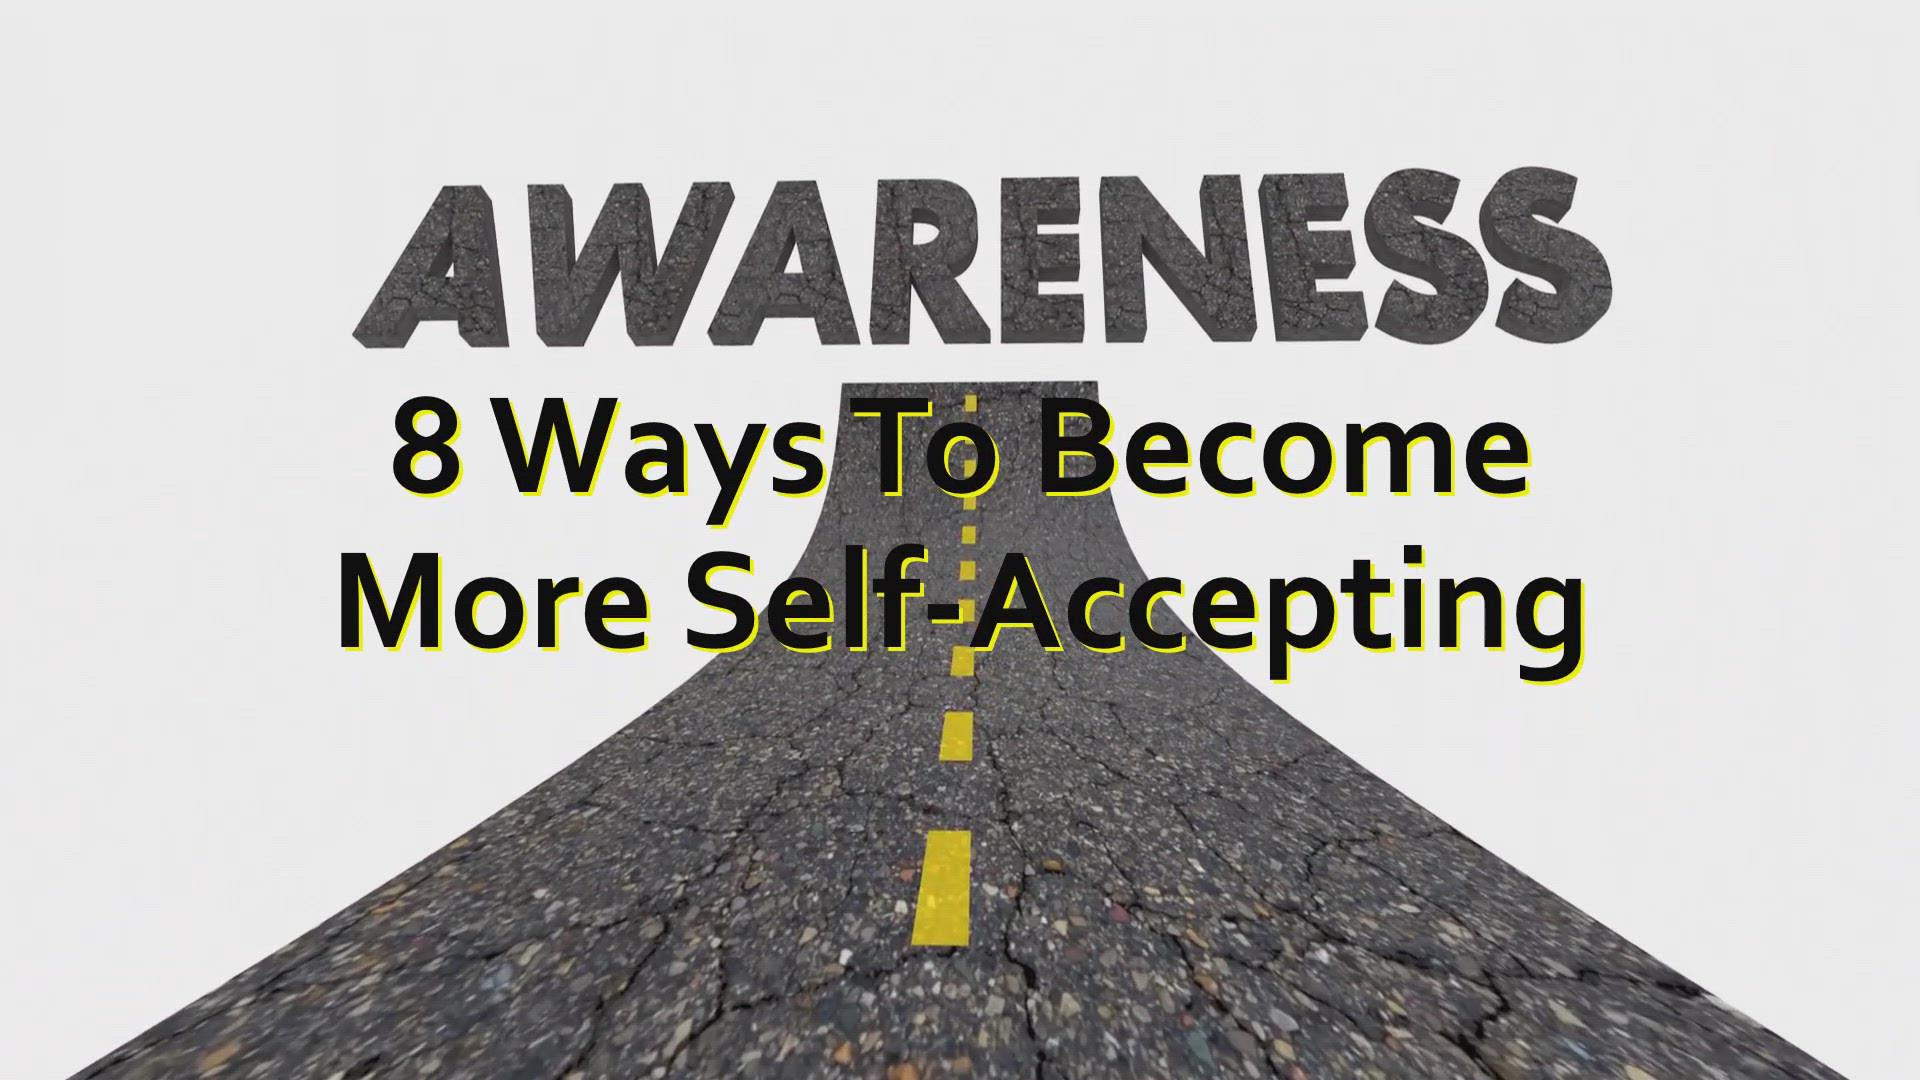 'Video thumbnail for 5 Ways To Become More Self-Accepting'